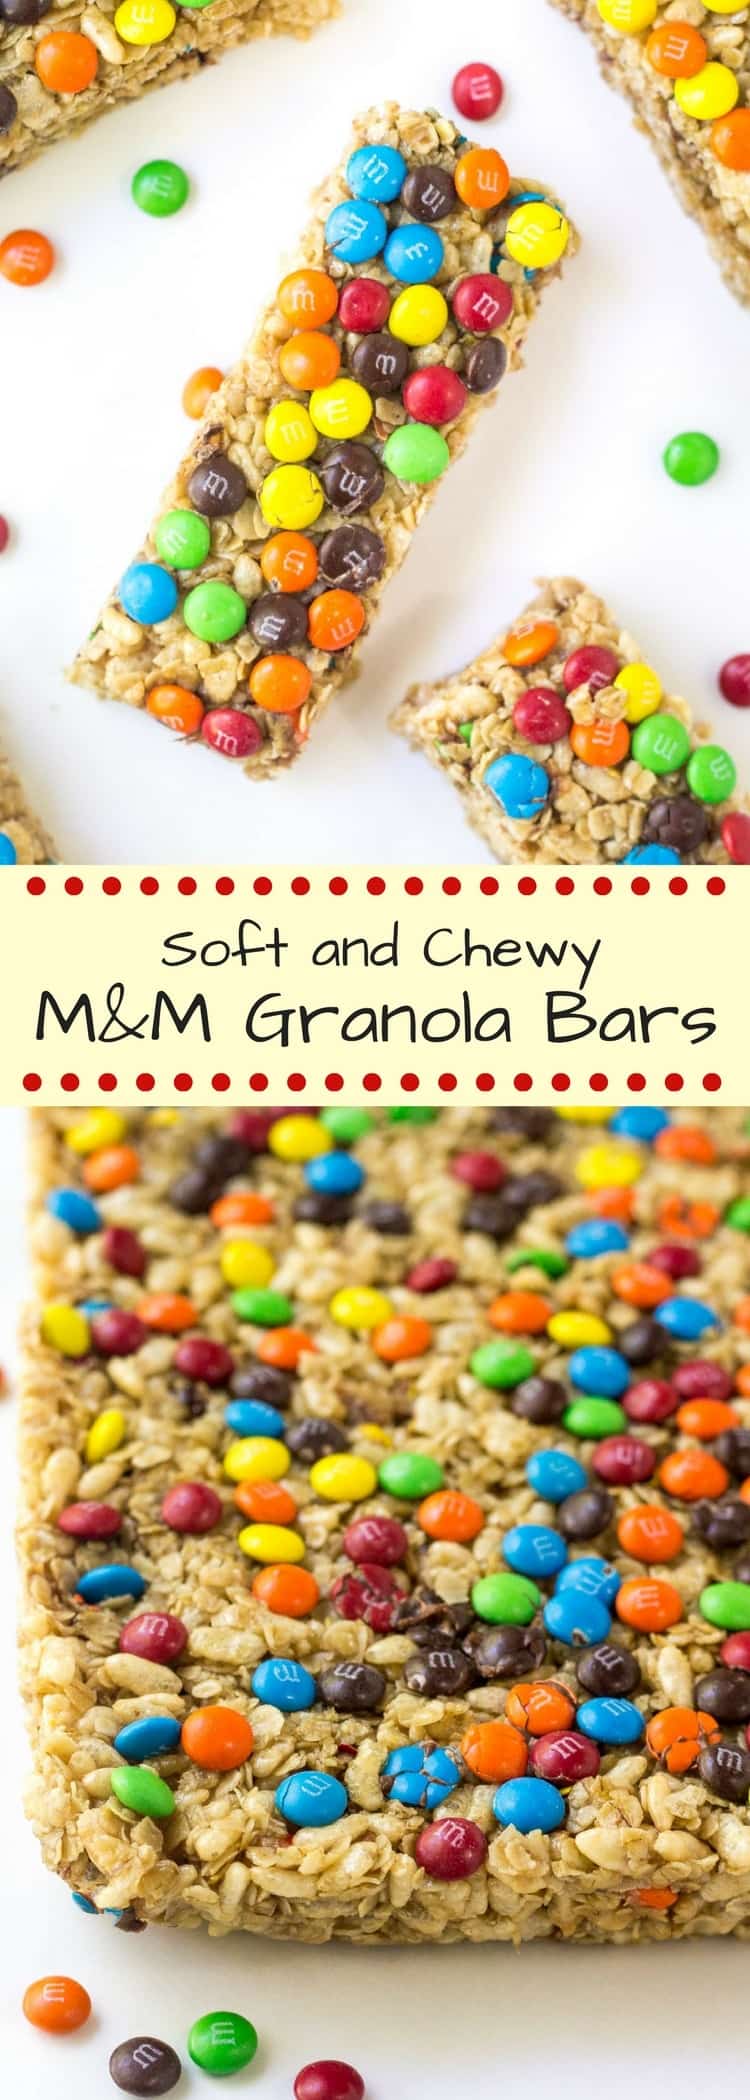 If you like simple no bake cookies, you're going to love our homemade chewy M&M granola bars are the perfect after school snack. No bake, soft & chewy, and filled with M&Ms!